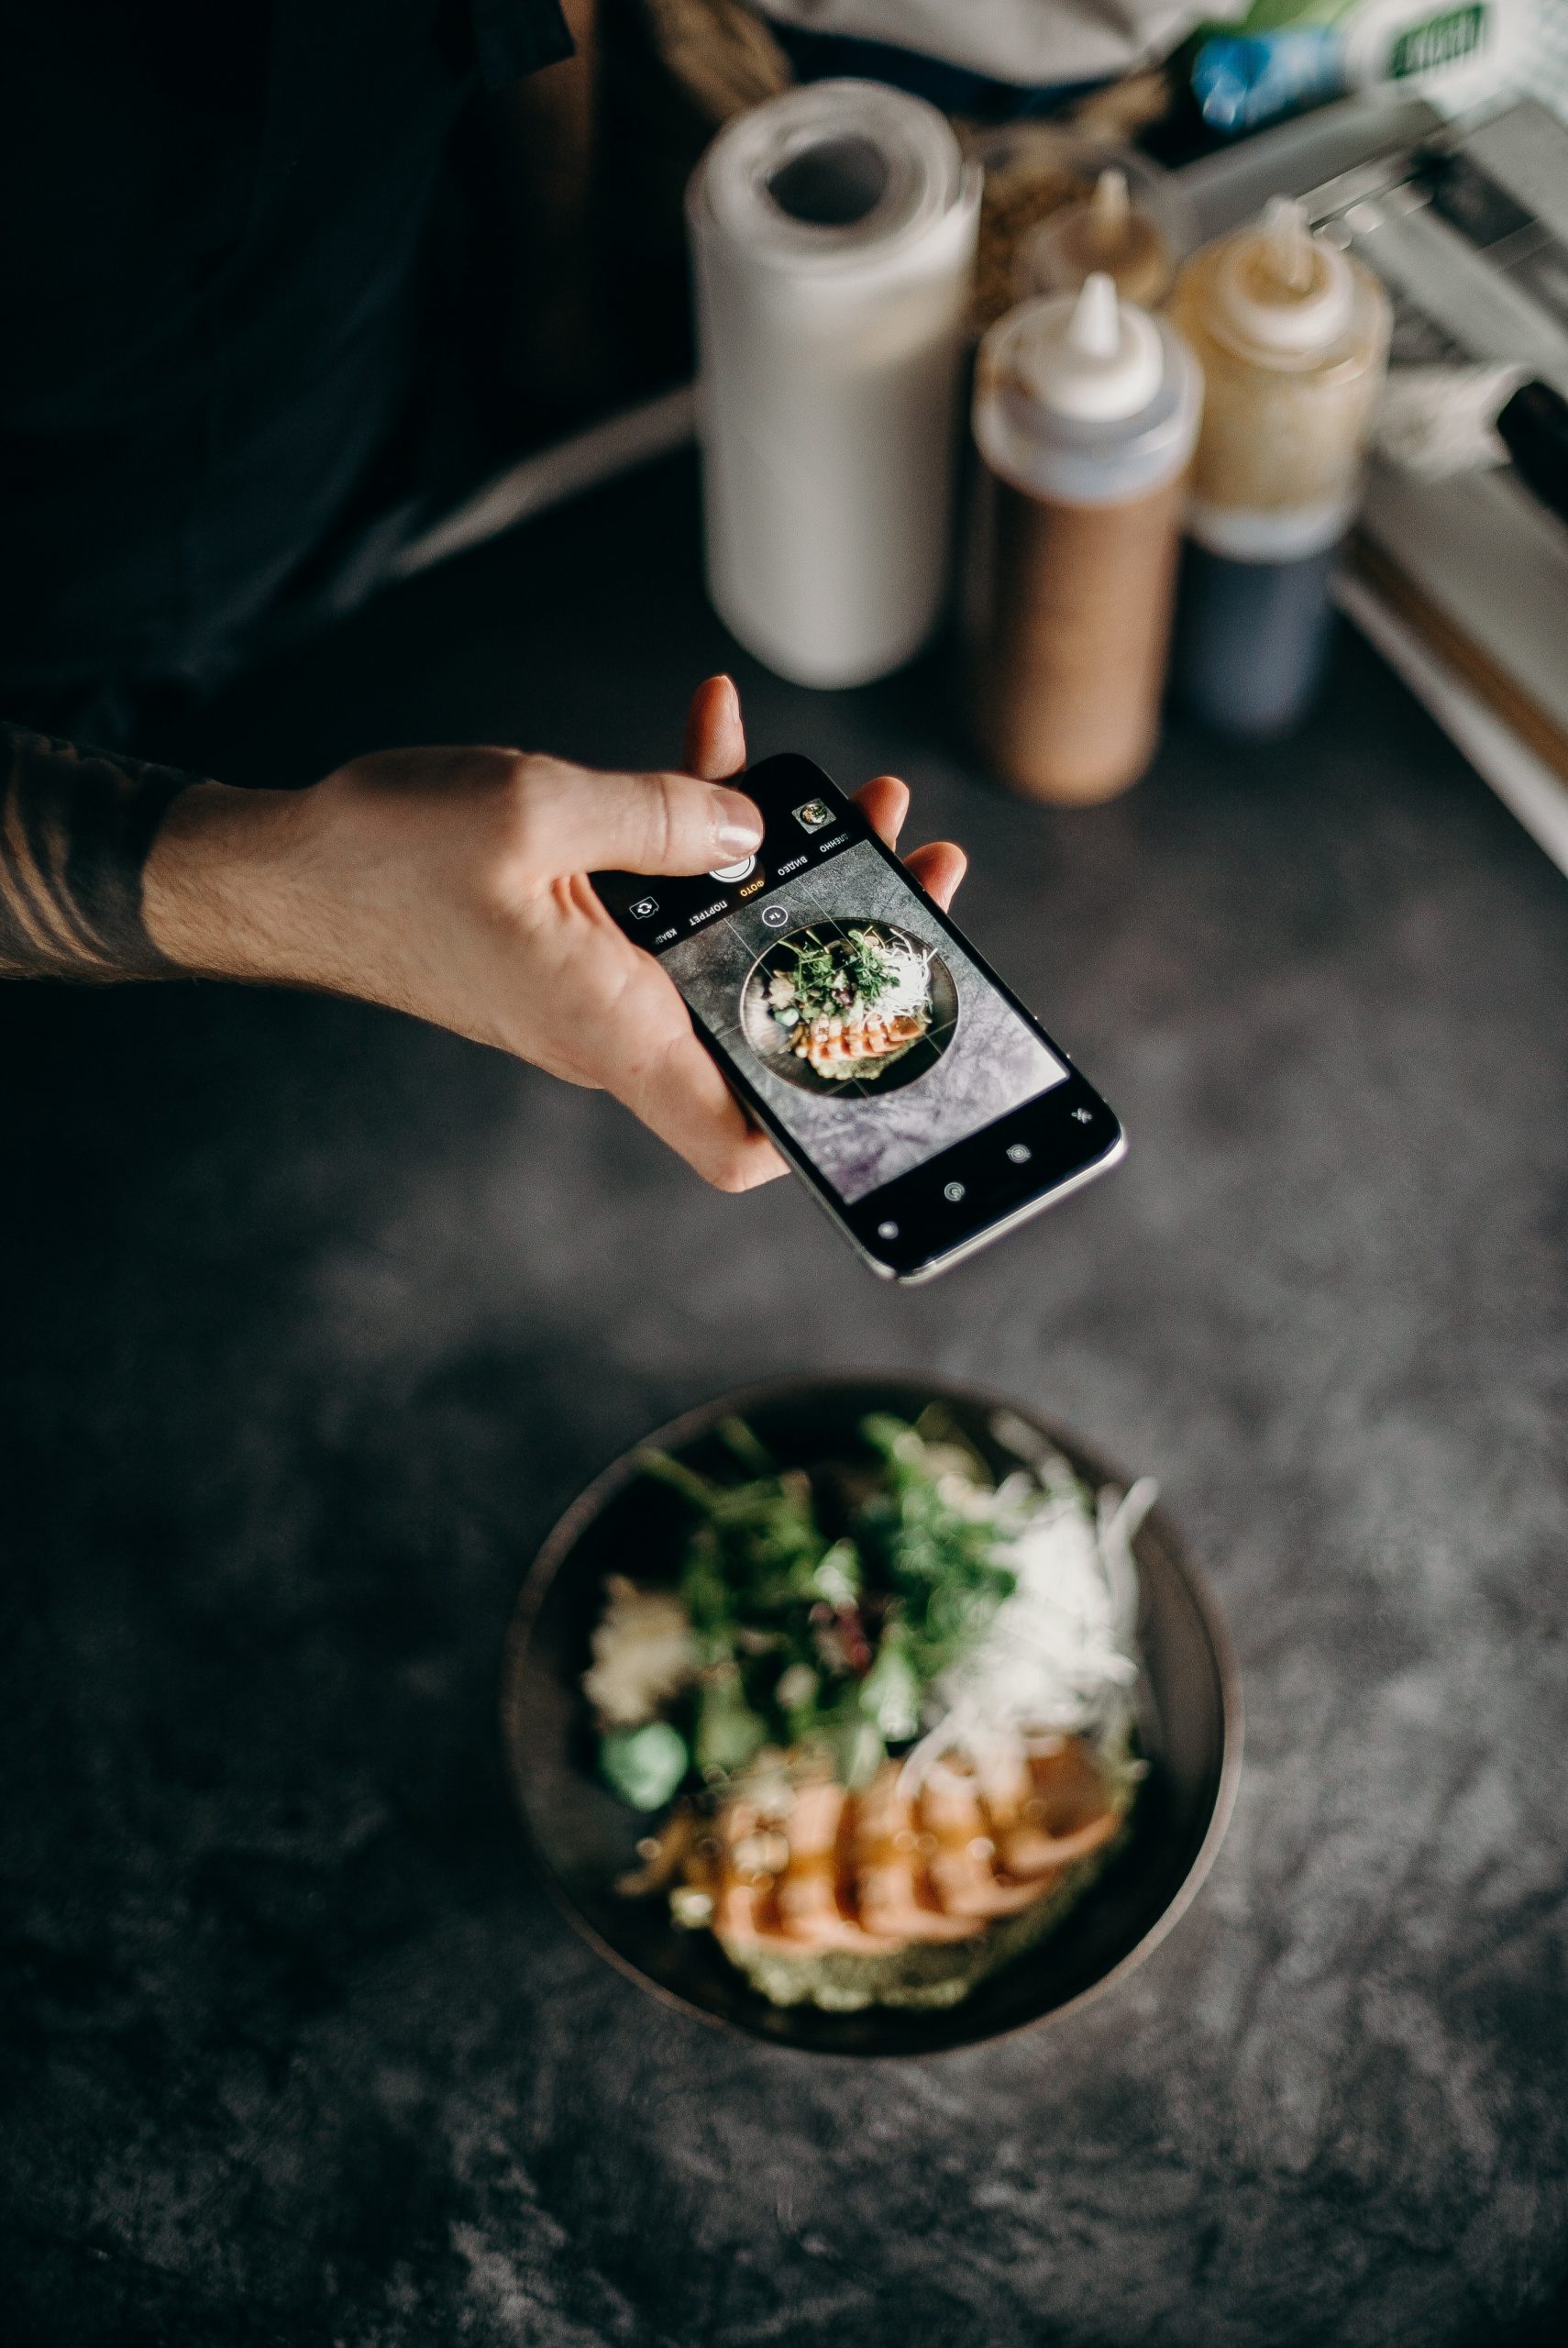 An image of an influencer taking a picture of his food